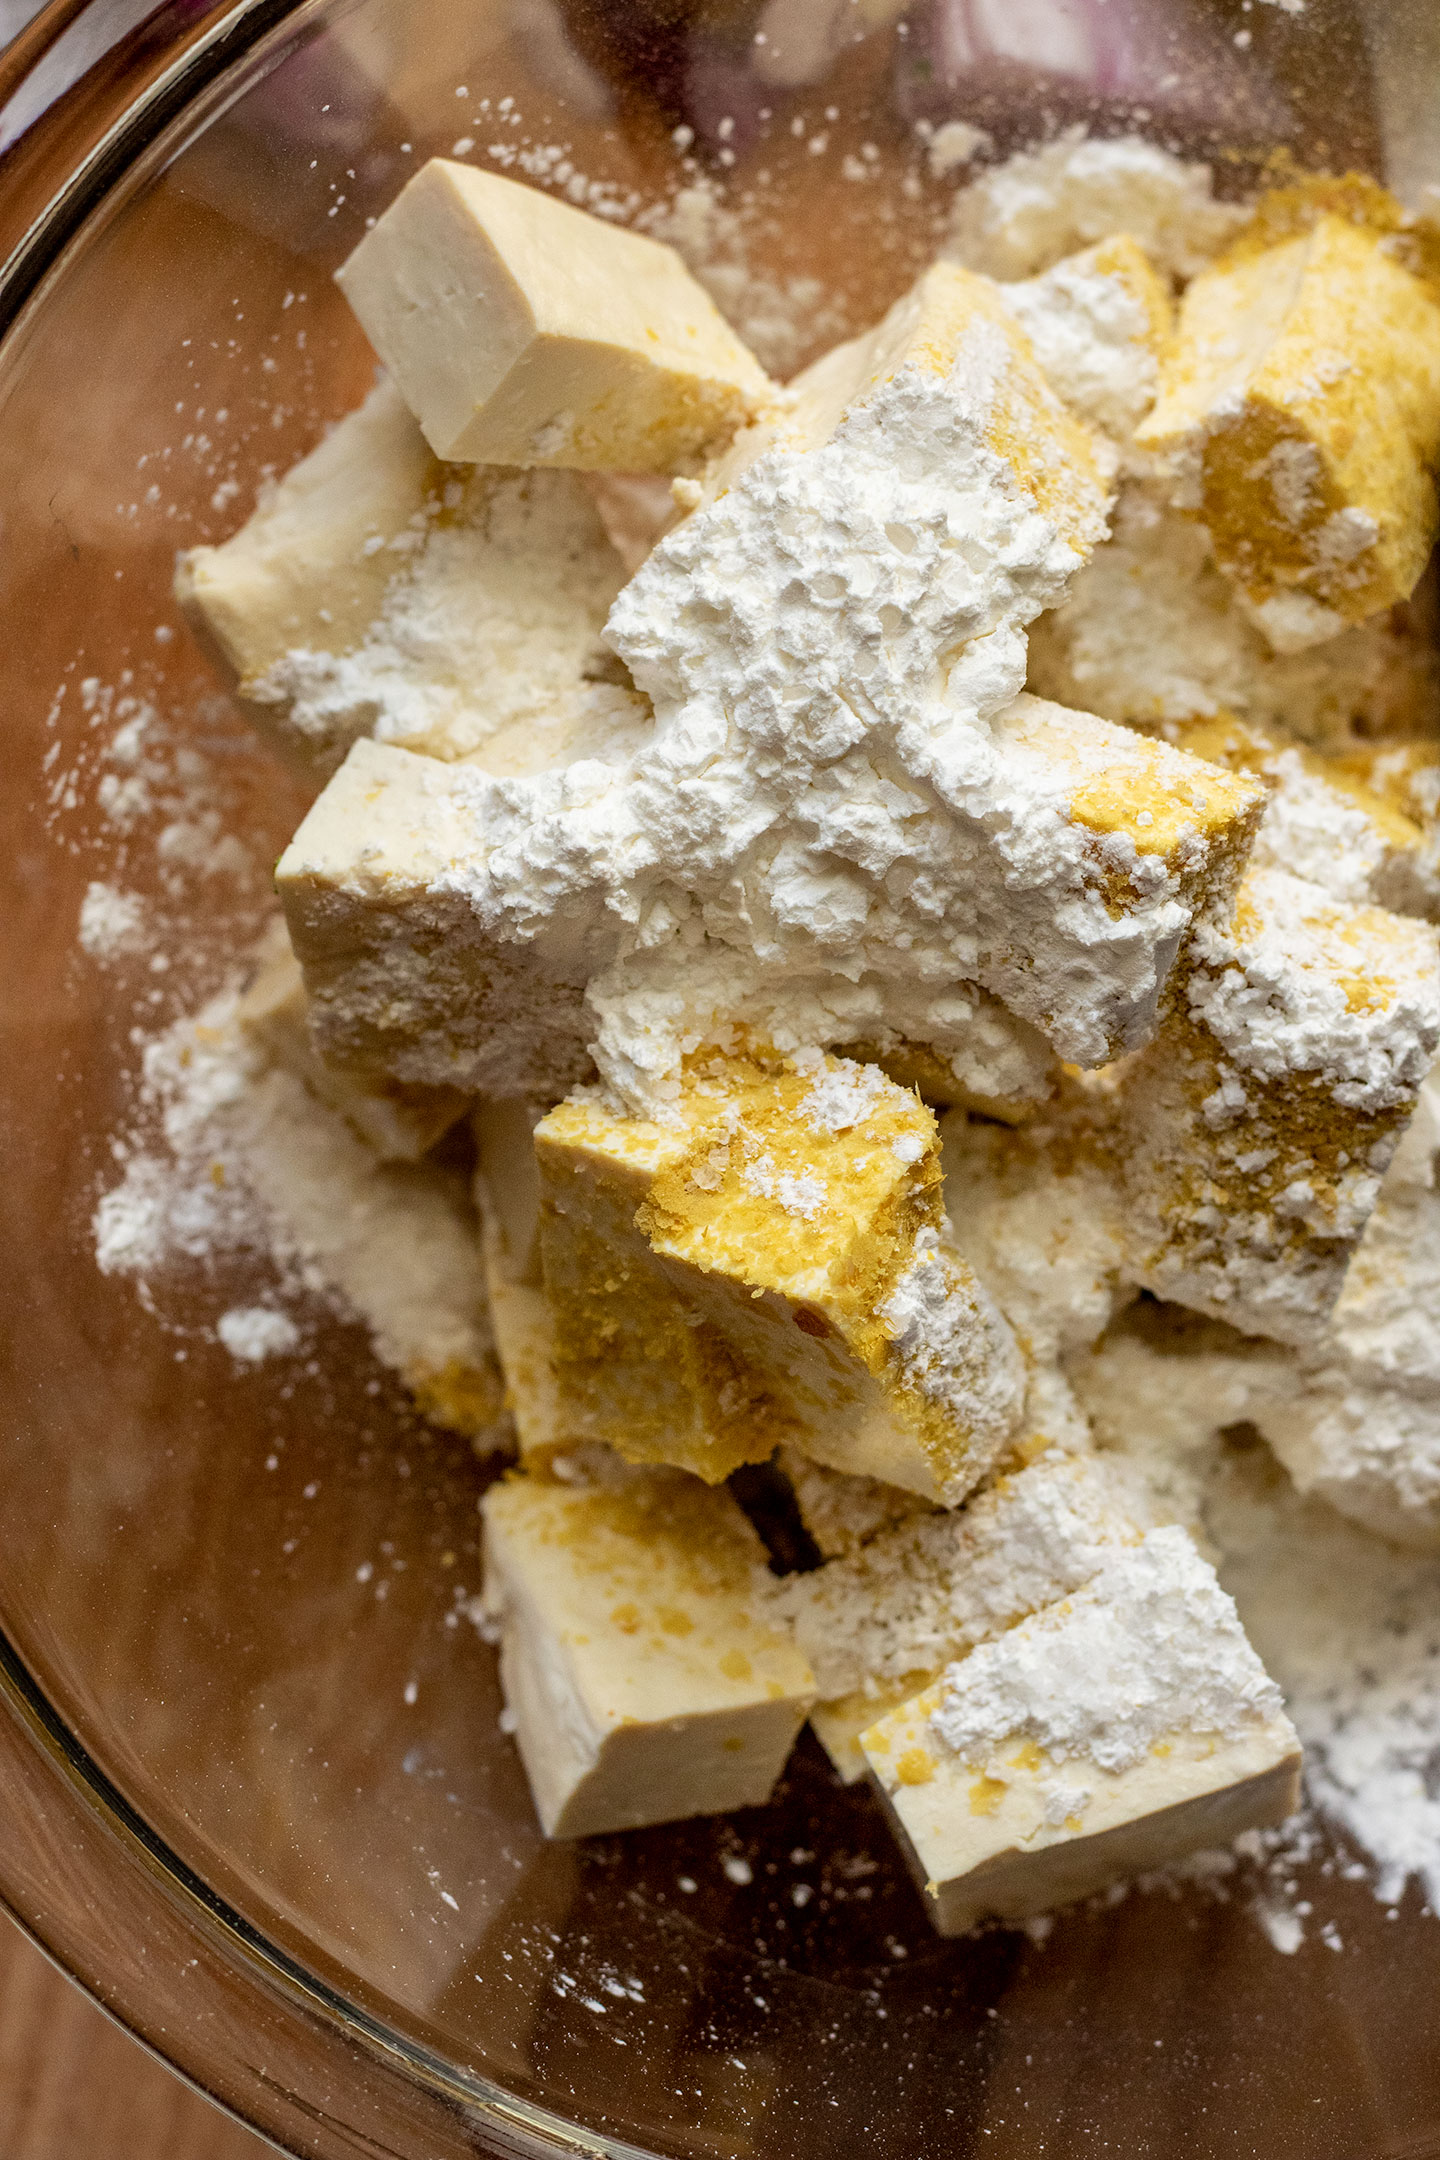 Tofu coated in cornstarch and nutritional yeast being tossed together in a bowl.